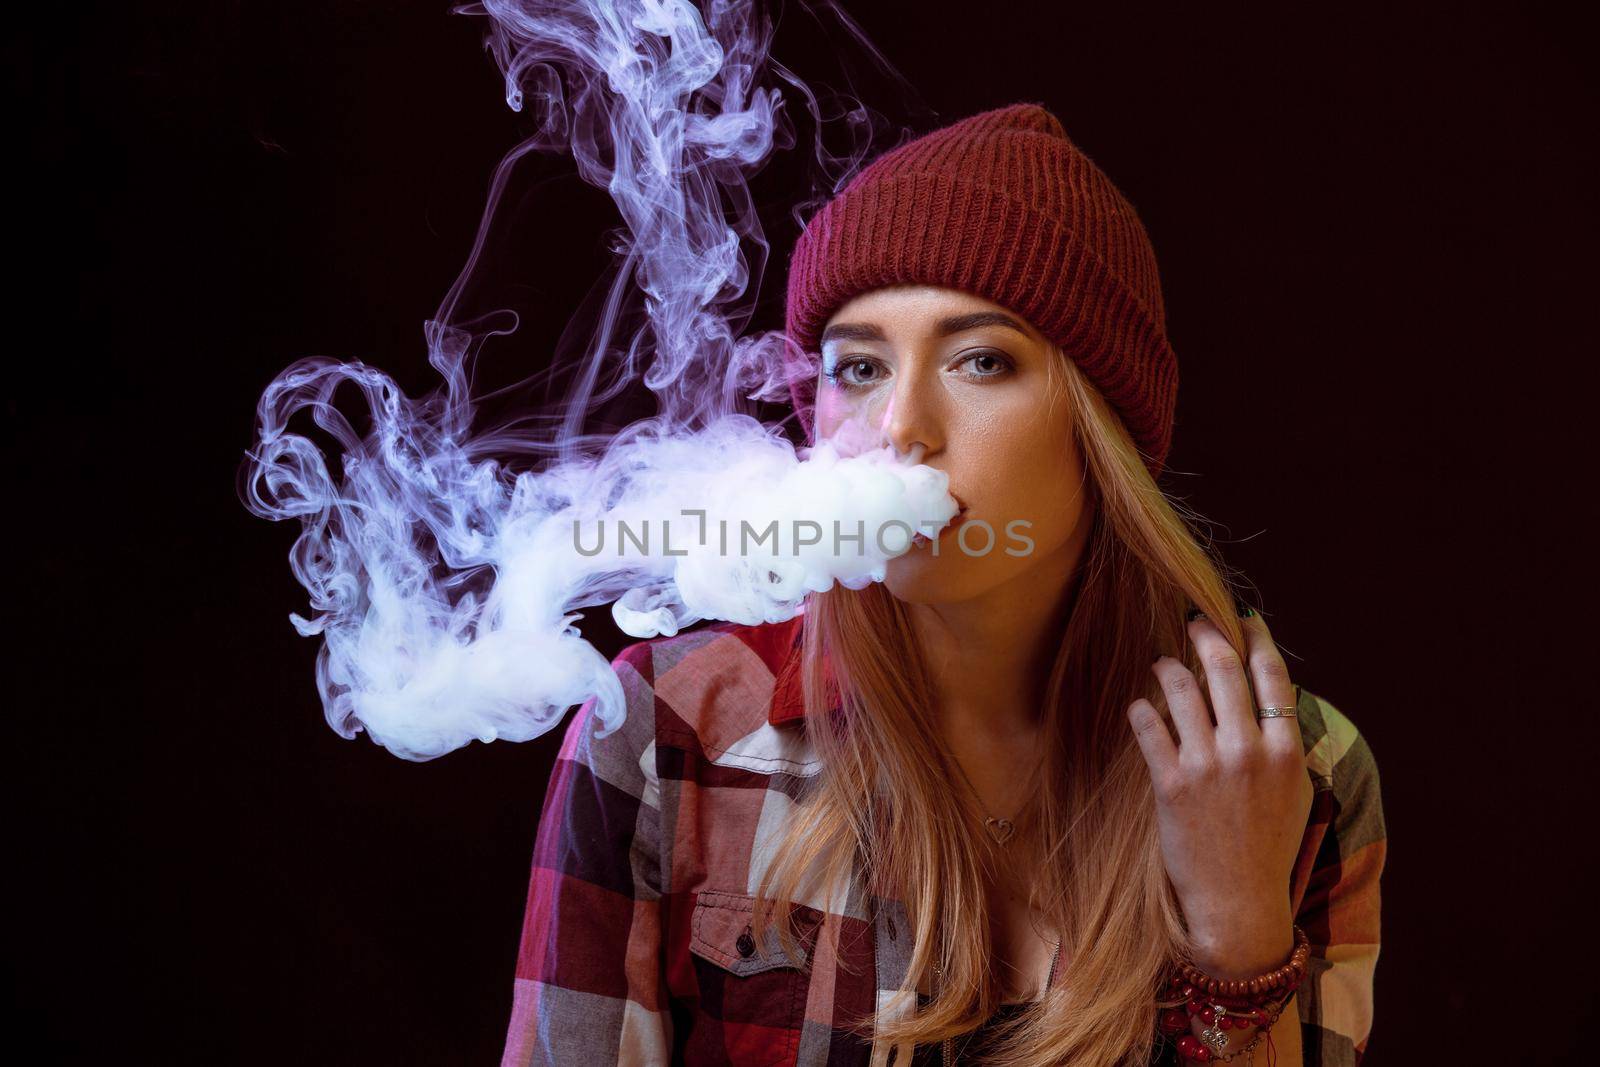 young woman smoking electronic cigarette on black background. woman looking at the camera